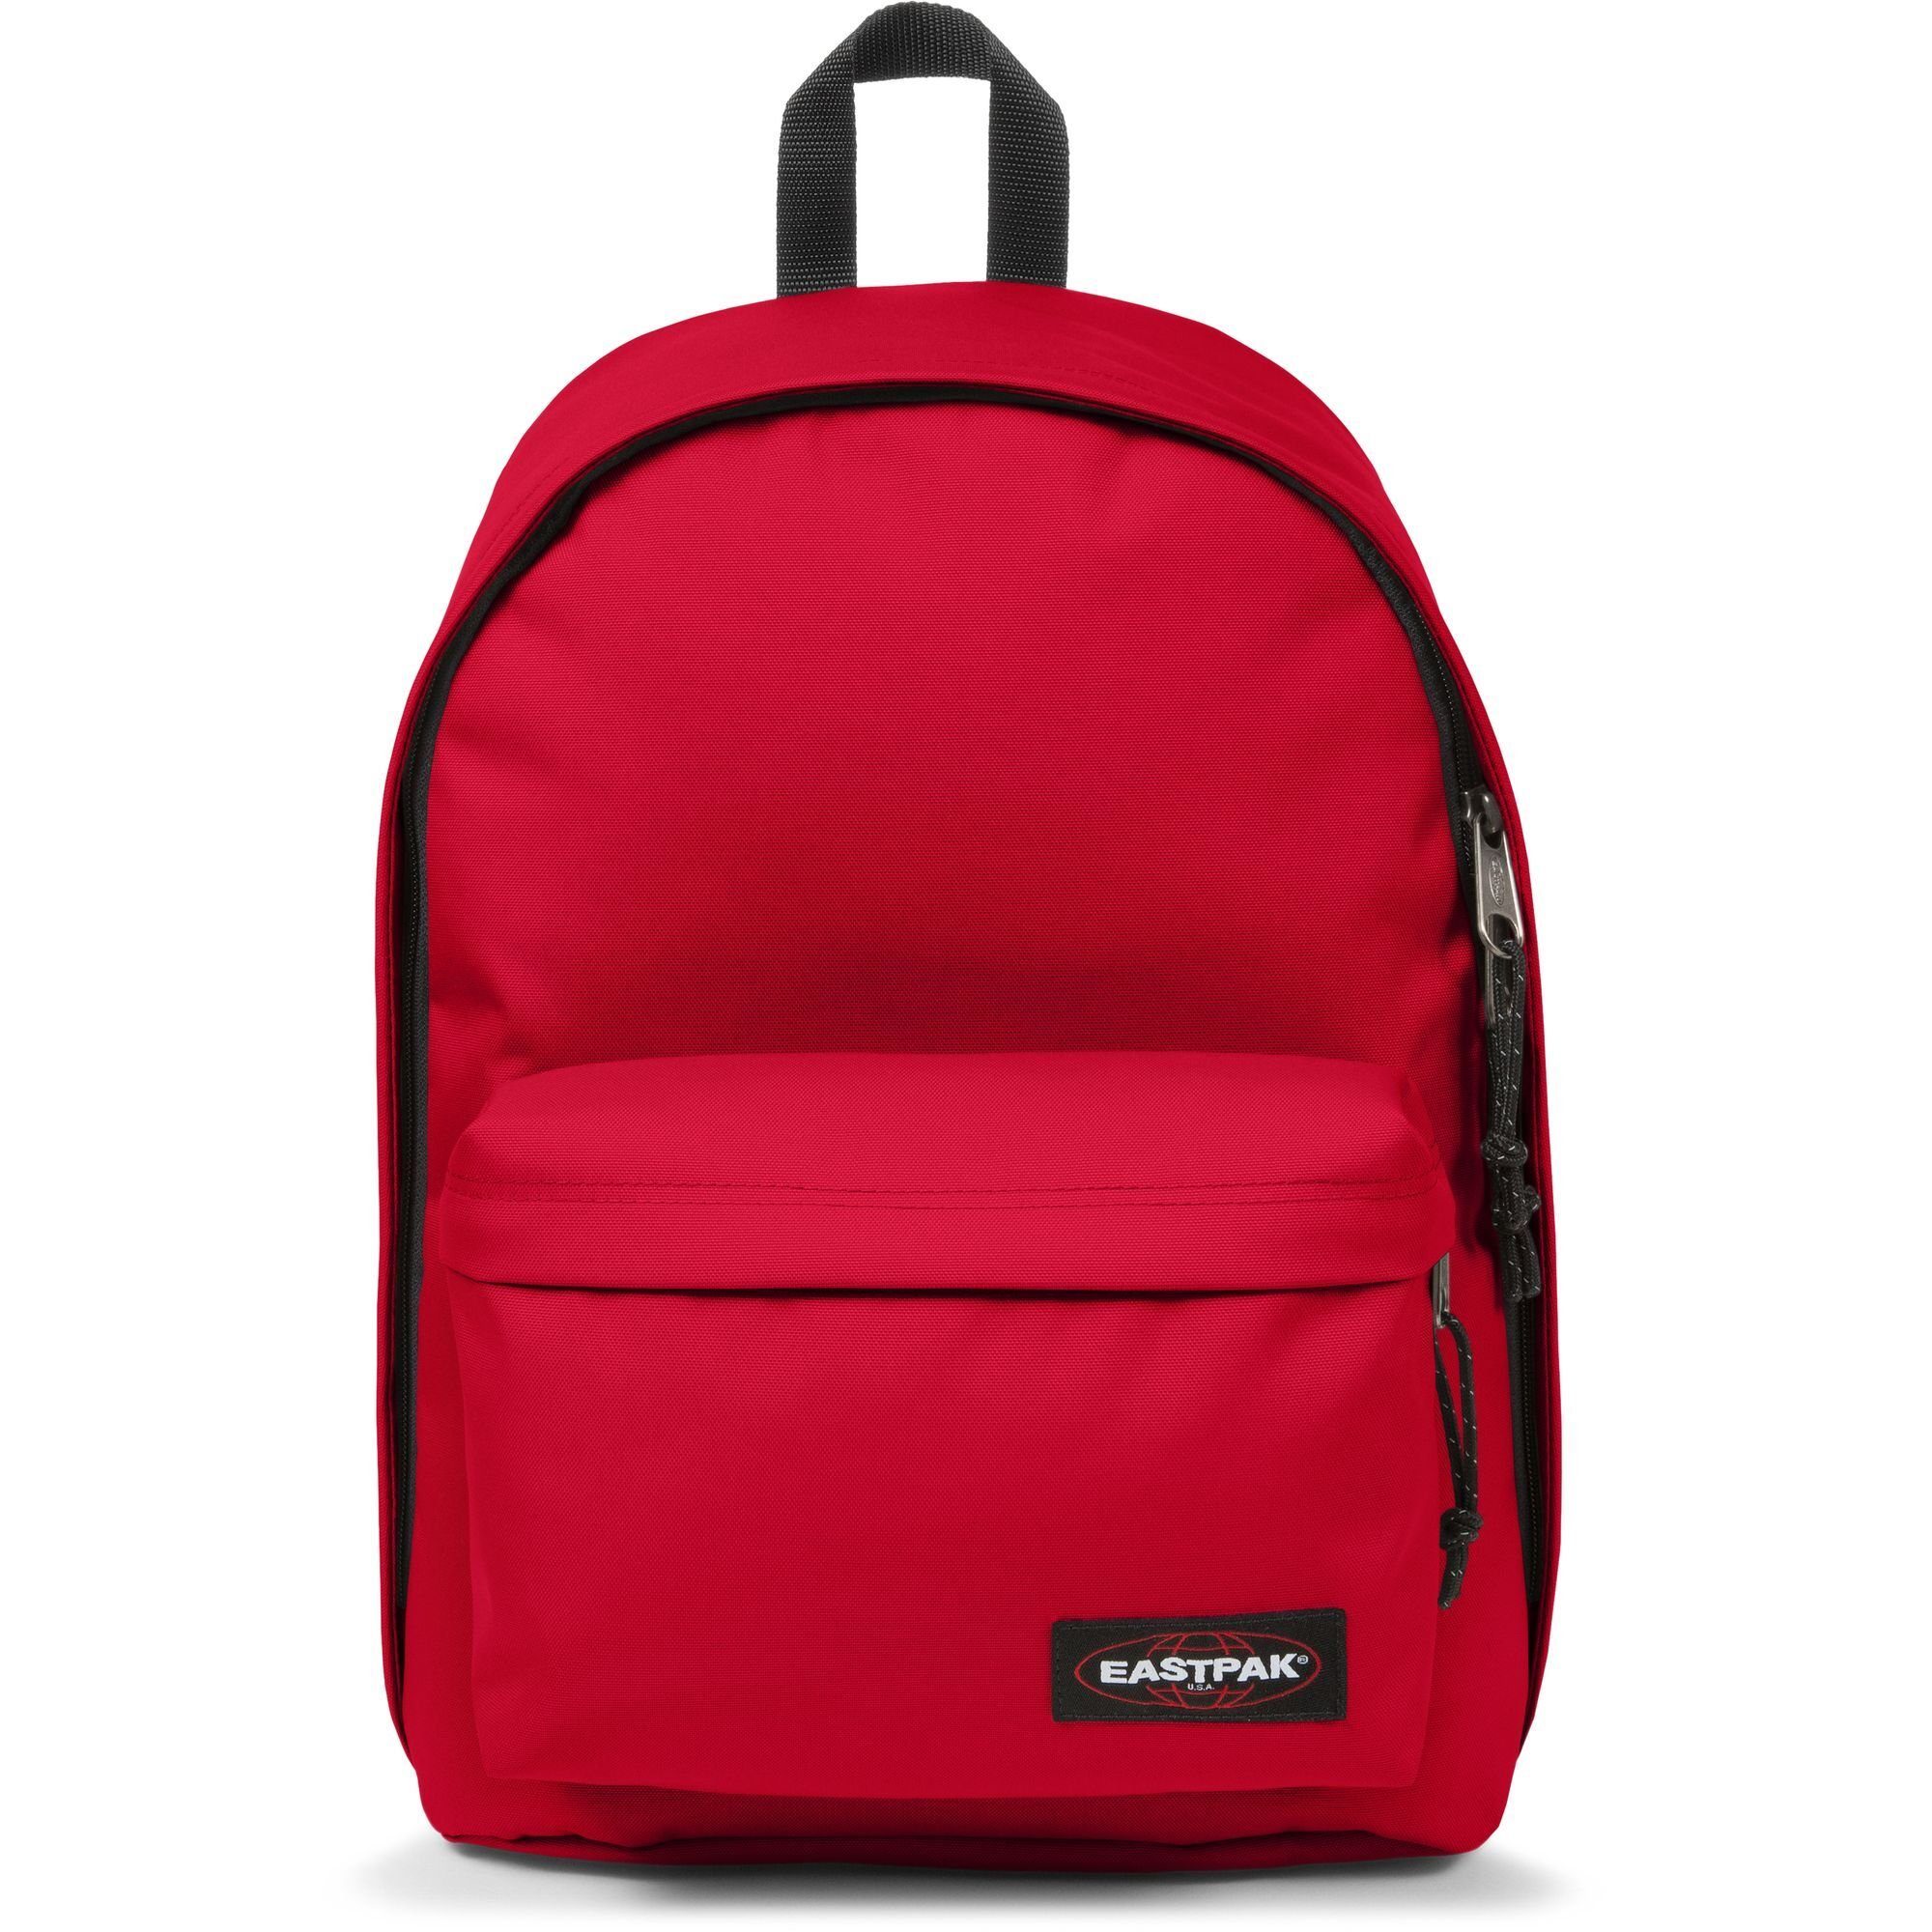 Eastpak Laptoprucksack Out Of Office, Polyamid sailor red